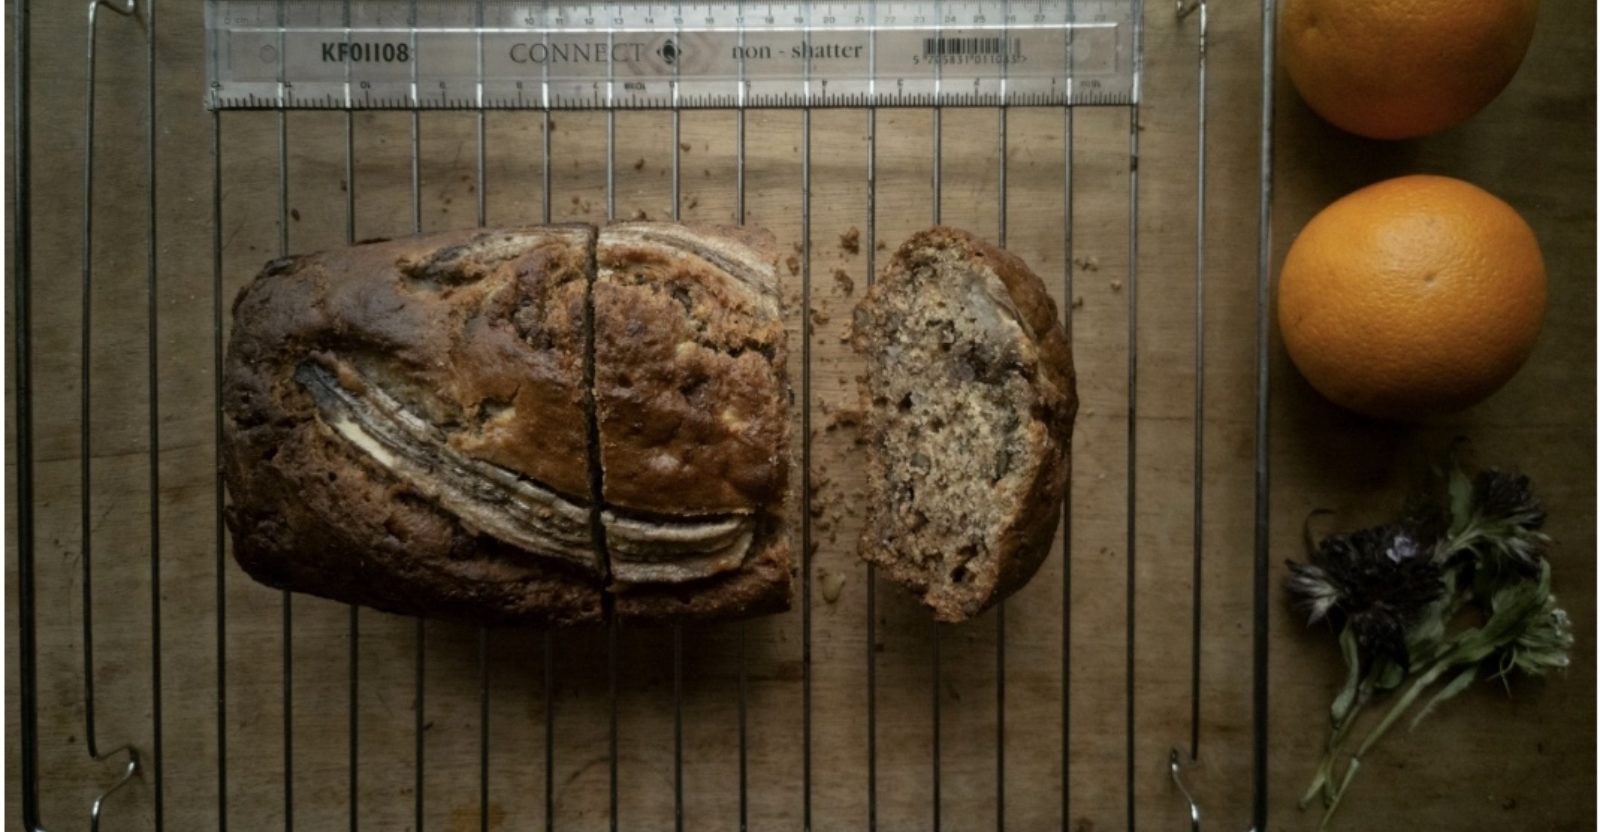 Image of a loaf of bread on a cooling rack from birds eye view, there is a ruler above it on the rack and the bread has 2 large chunks sliced off the end. There are two oranges and some herbs beside the rack.